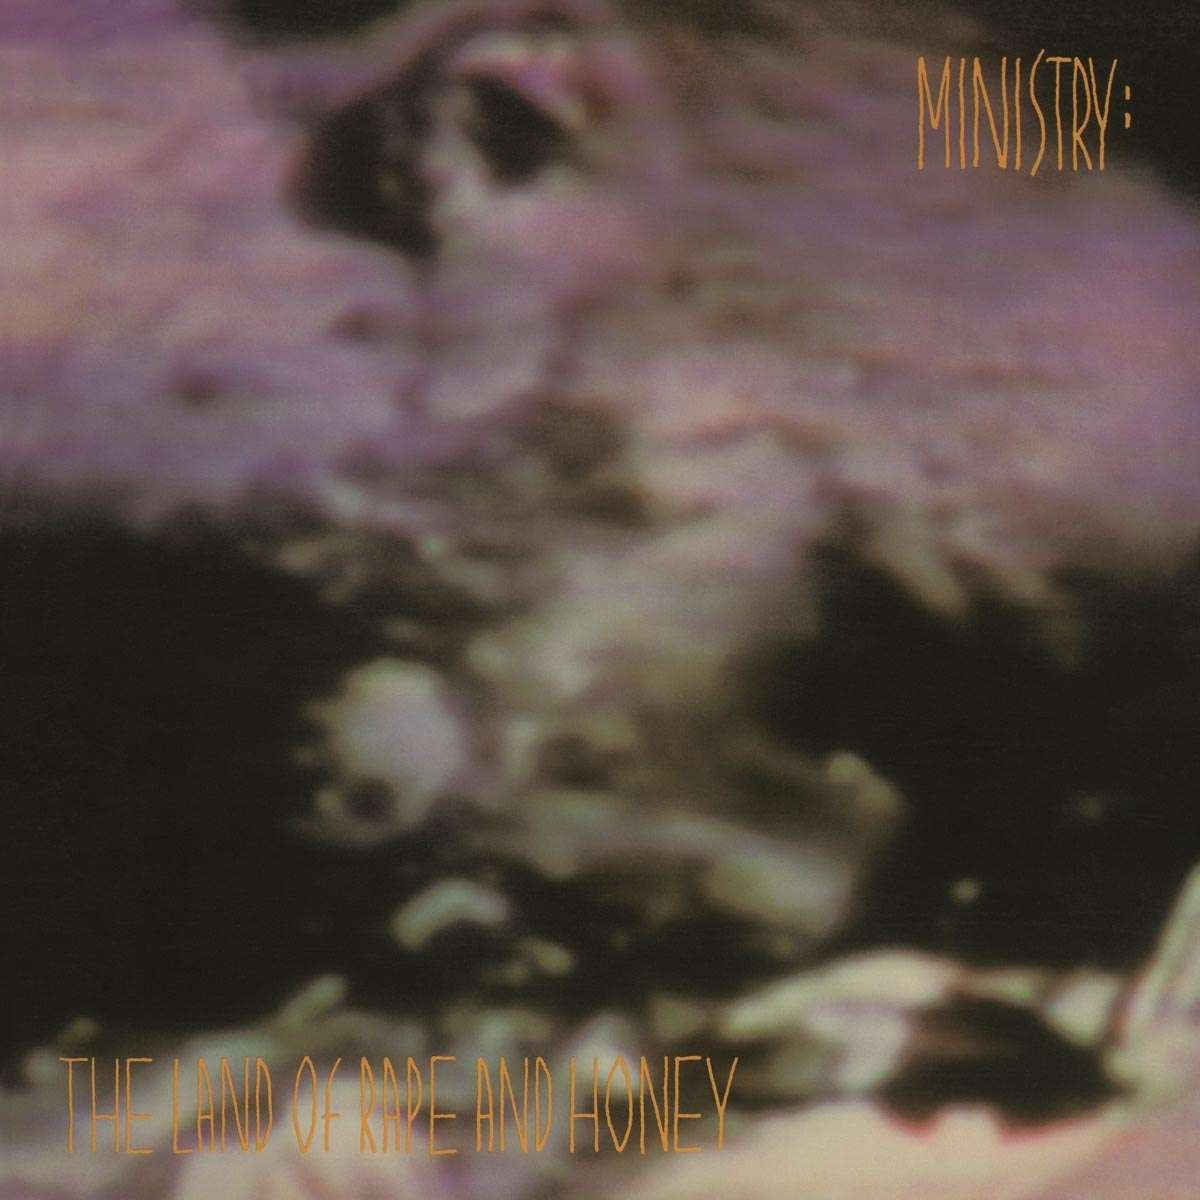 Ministry - The Land Of Rape And Honey - 33RPM